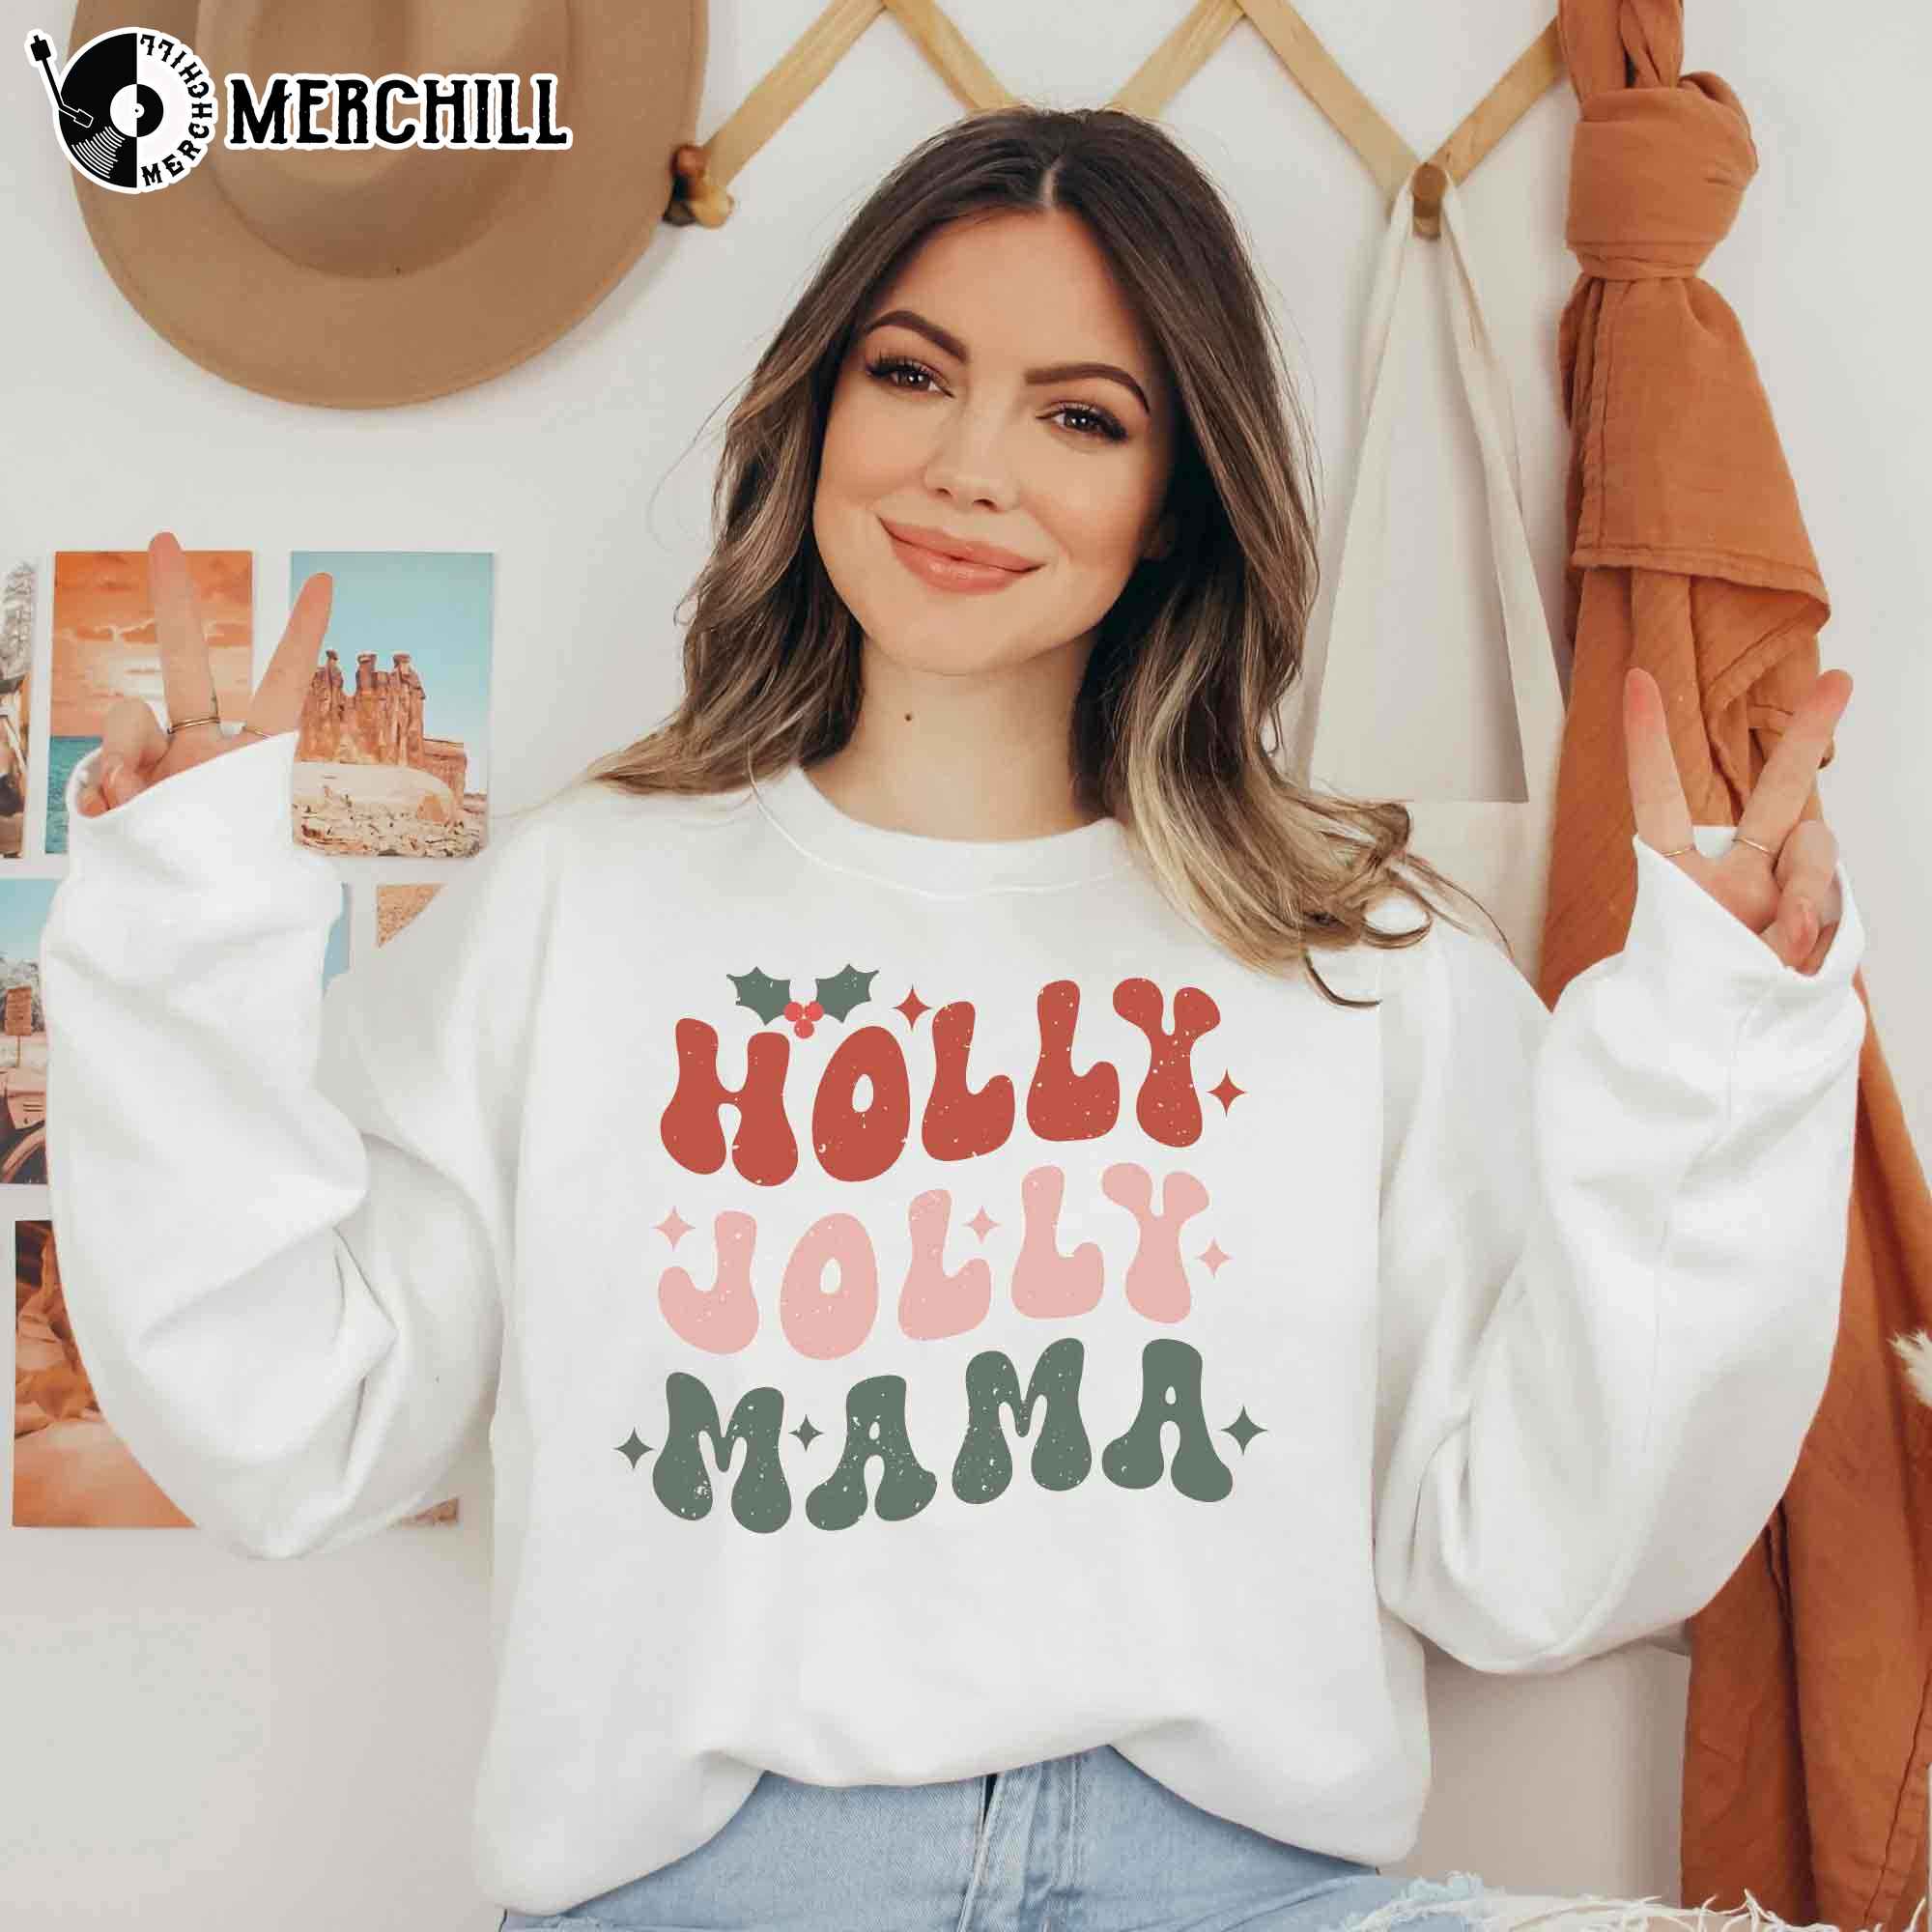 https://images.merchill.com/wp-content/uploads/2022/11/Holly-Jolly-Mama-Shirt-Have-A-Holly-Dolly-Christmas-4.jpg